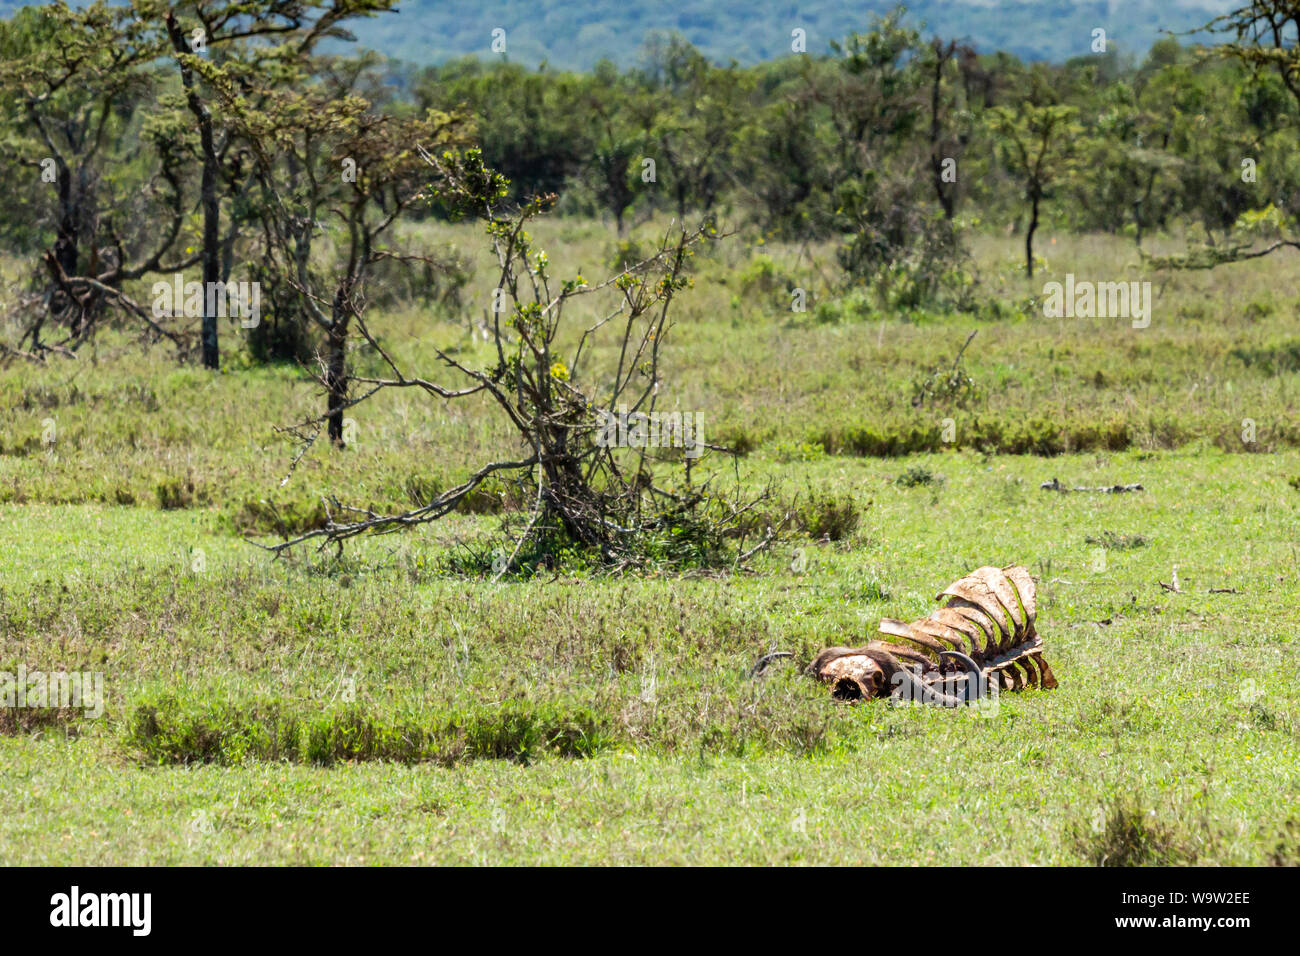 Colour photograph of typical Kenyan wild landscape with single large Buffalo carcass/carcase in foreground taken in Kenya. Stock Photo